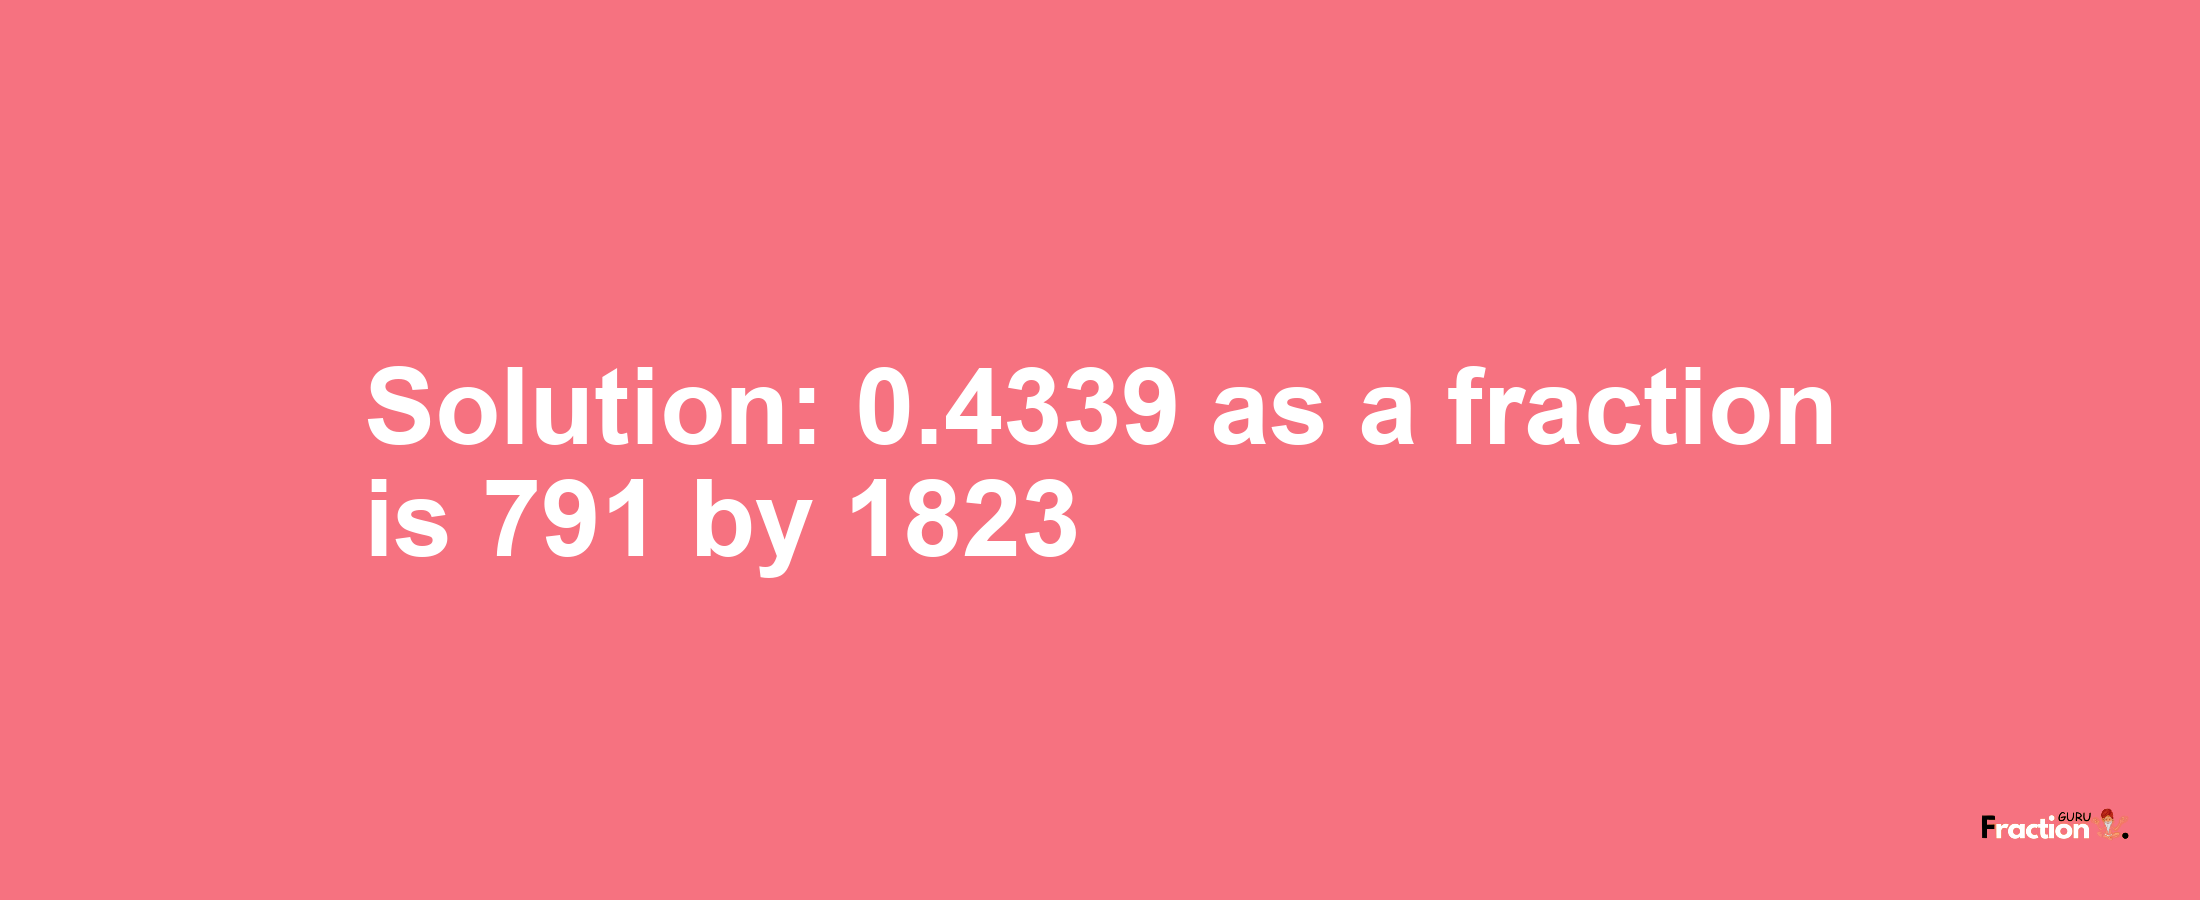 Solution:0.4339 as a fraction is 791/1823